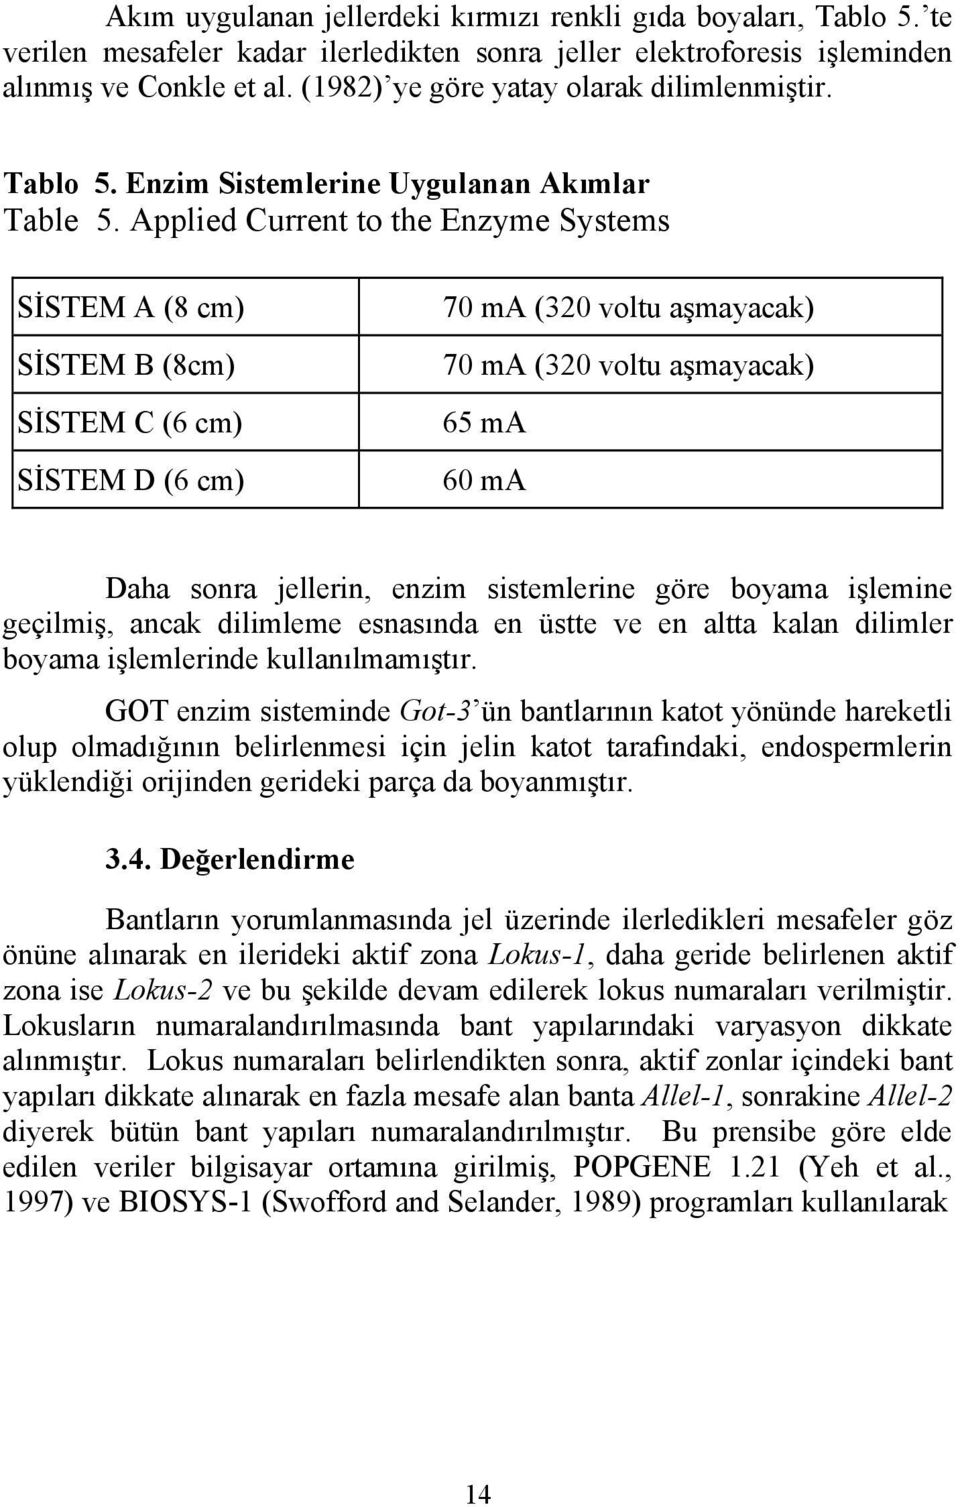 Applied Current to the Enzyme Systems SİSTEM A (8 cm) SİSTEM B (8cm) SİSTEM C (6 cm) SİSTEM D (6 cm) 70 ma (320 voltu aşmayacak) 70 ma (320 voltu aşmayacak) 65 ma 60 ma Daha sonra jellerin, enzim